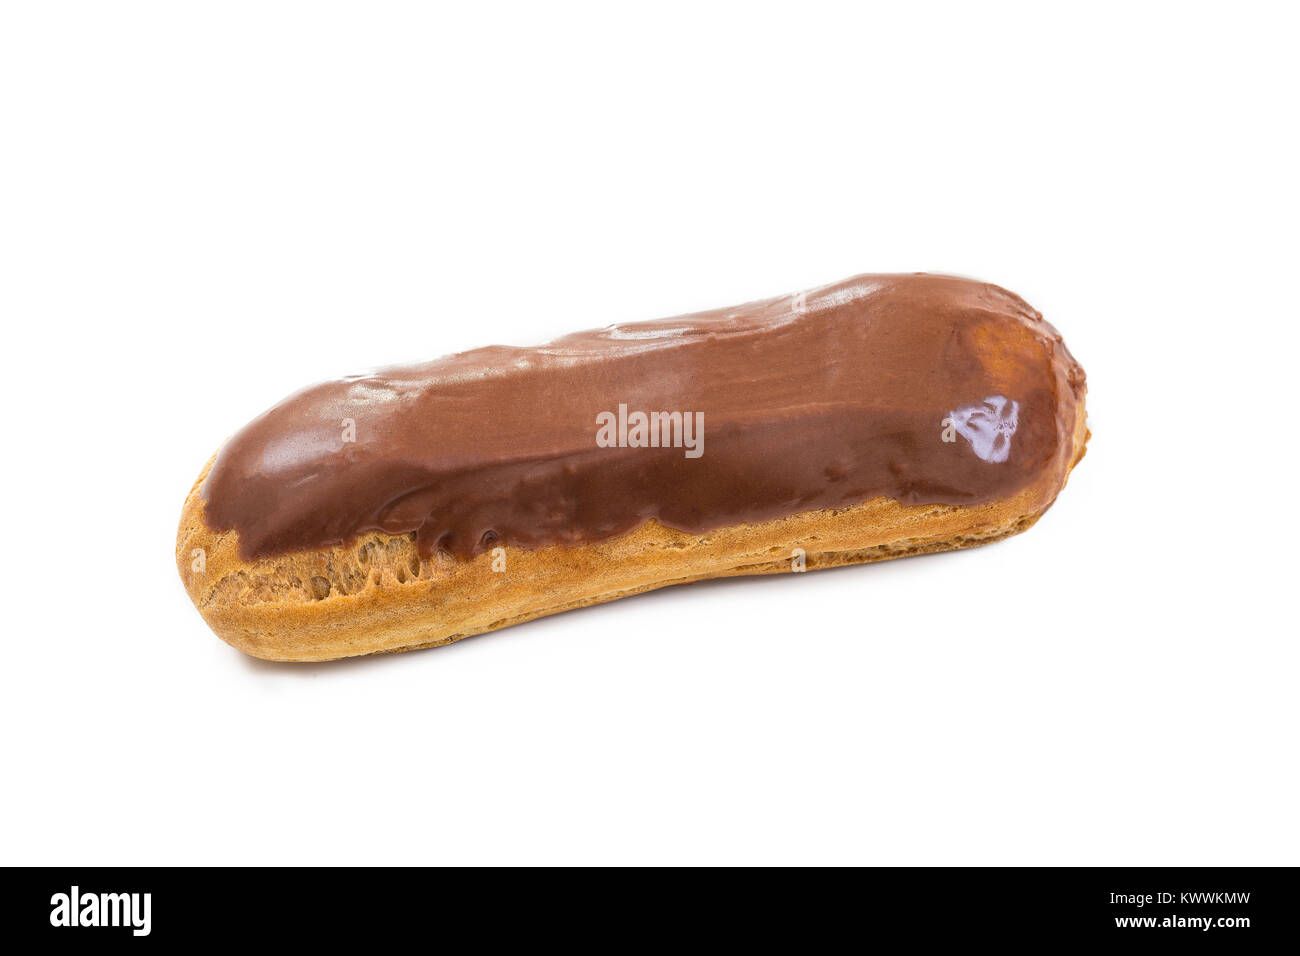 Chocolate eclair pastry on white background Stock Photo